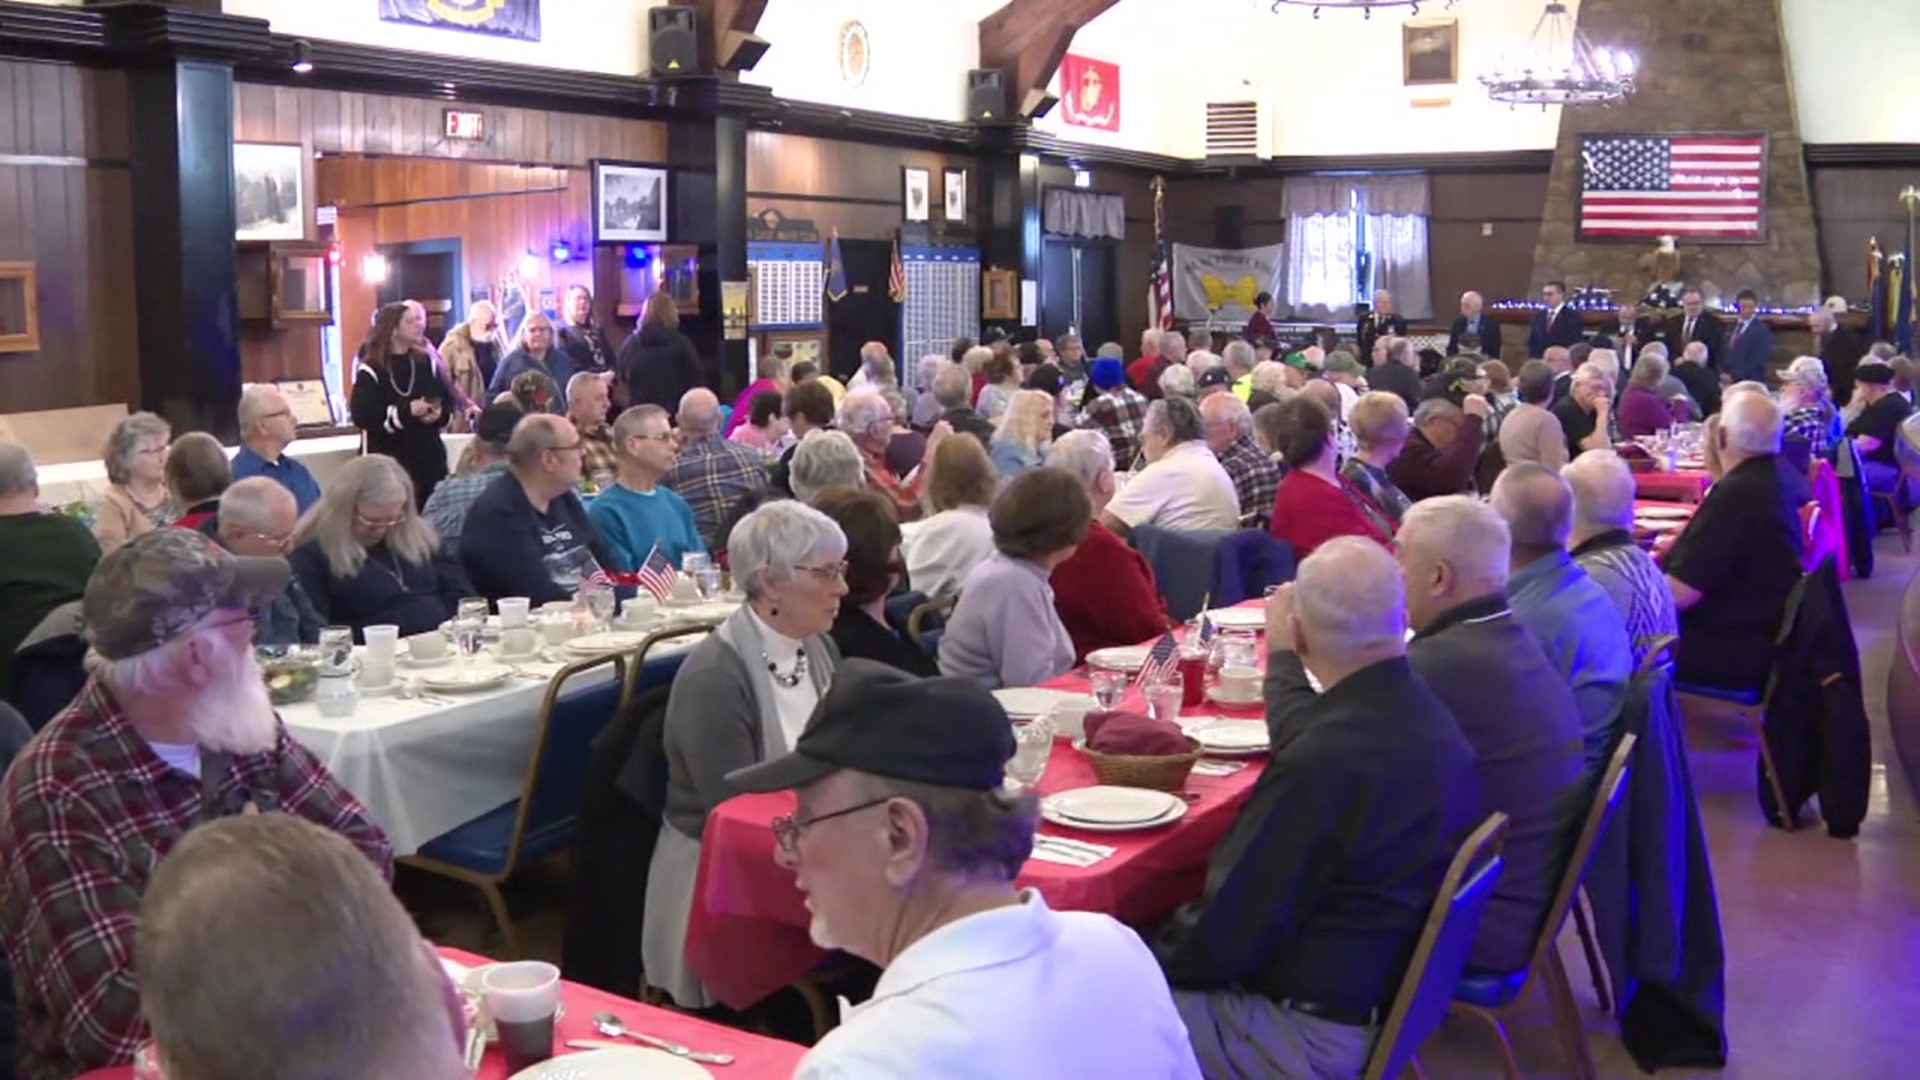 This National Vietnam War Veterans Day about 160 vets and their significant others gathered at the Legion for a luncheon.